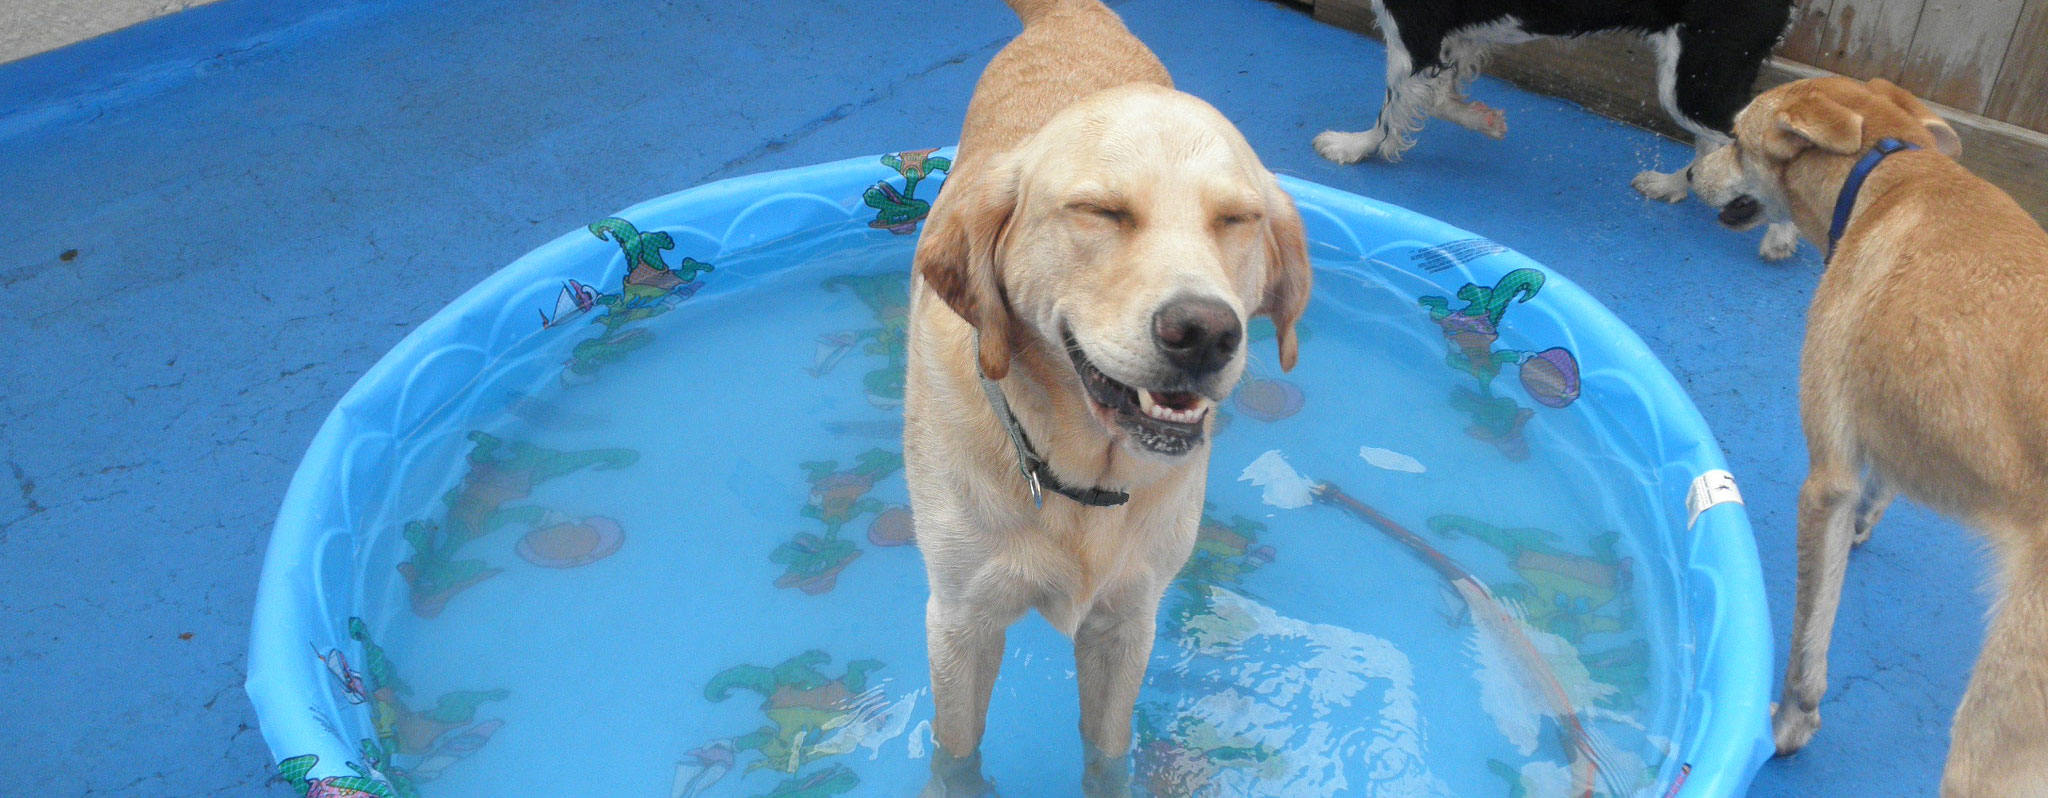 Dog Smiling in the pool at SoBo Dog Daycare in Baltimore Maryland